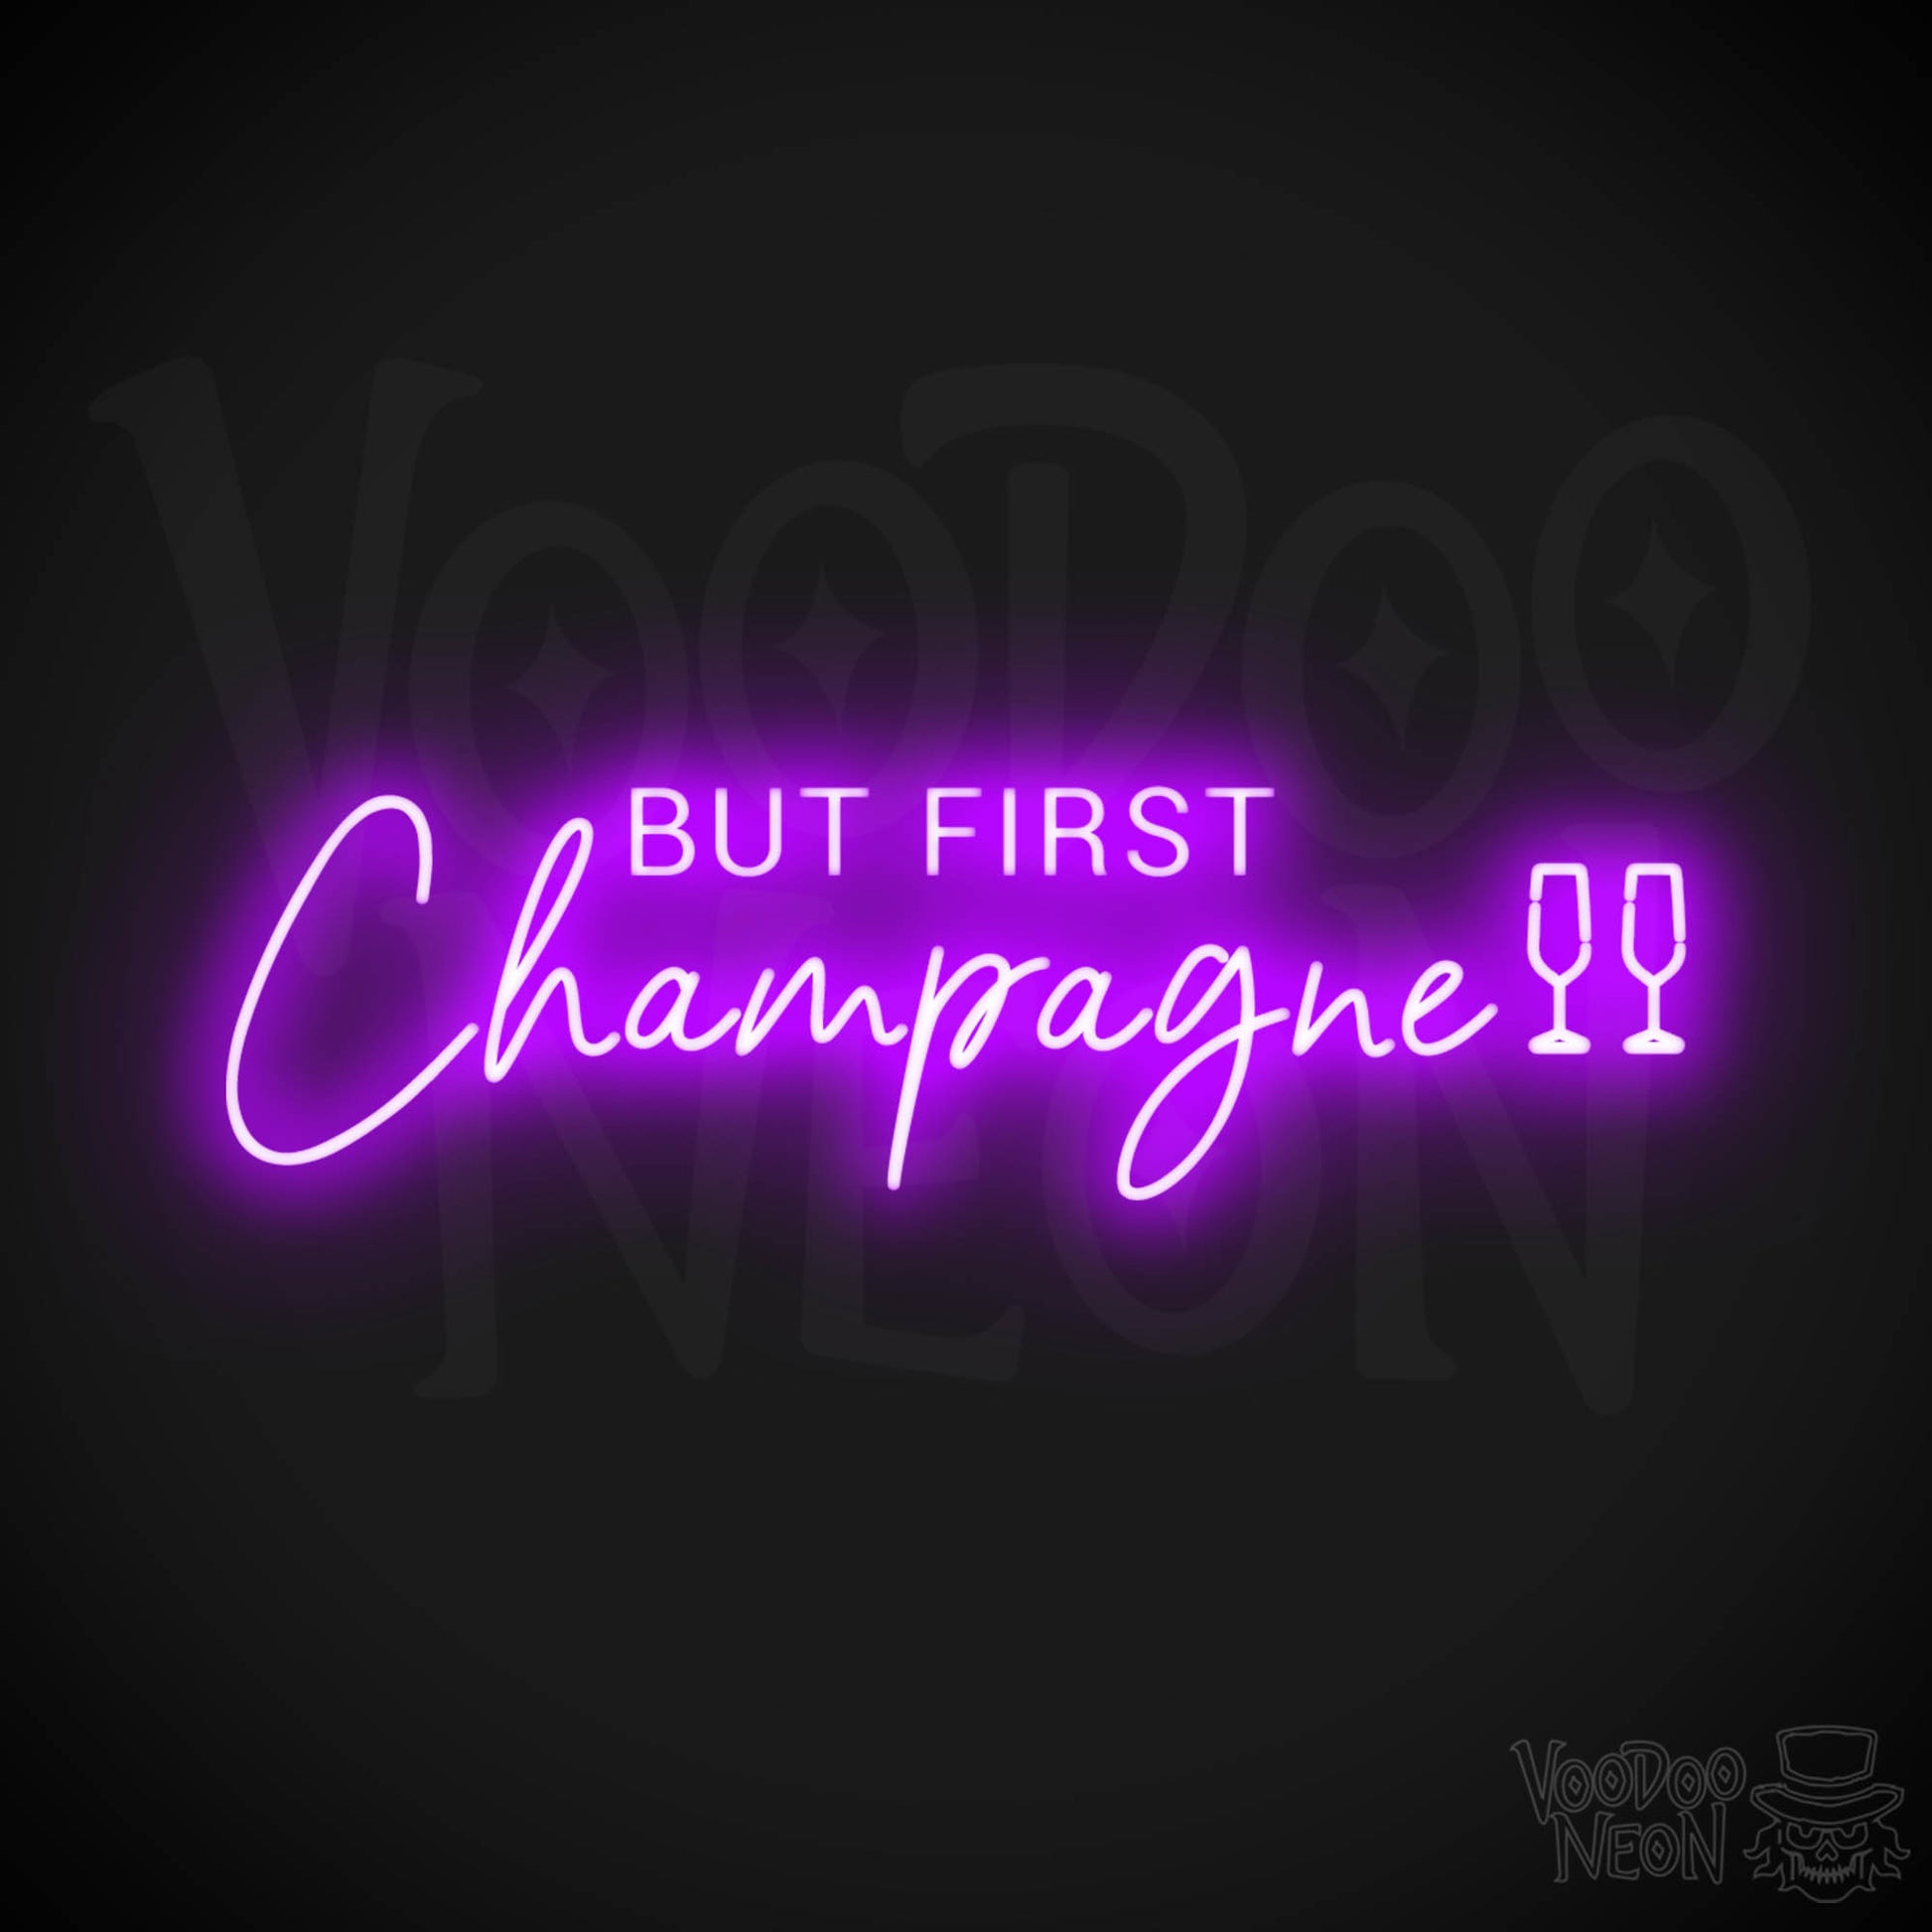 But First Champagne Neon Sign - Neon But First Champagne Sign - Neon Wall Art - Color Purple